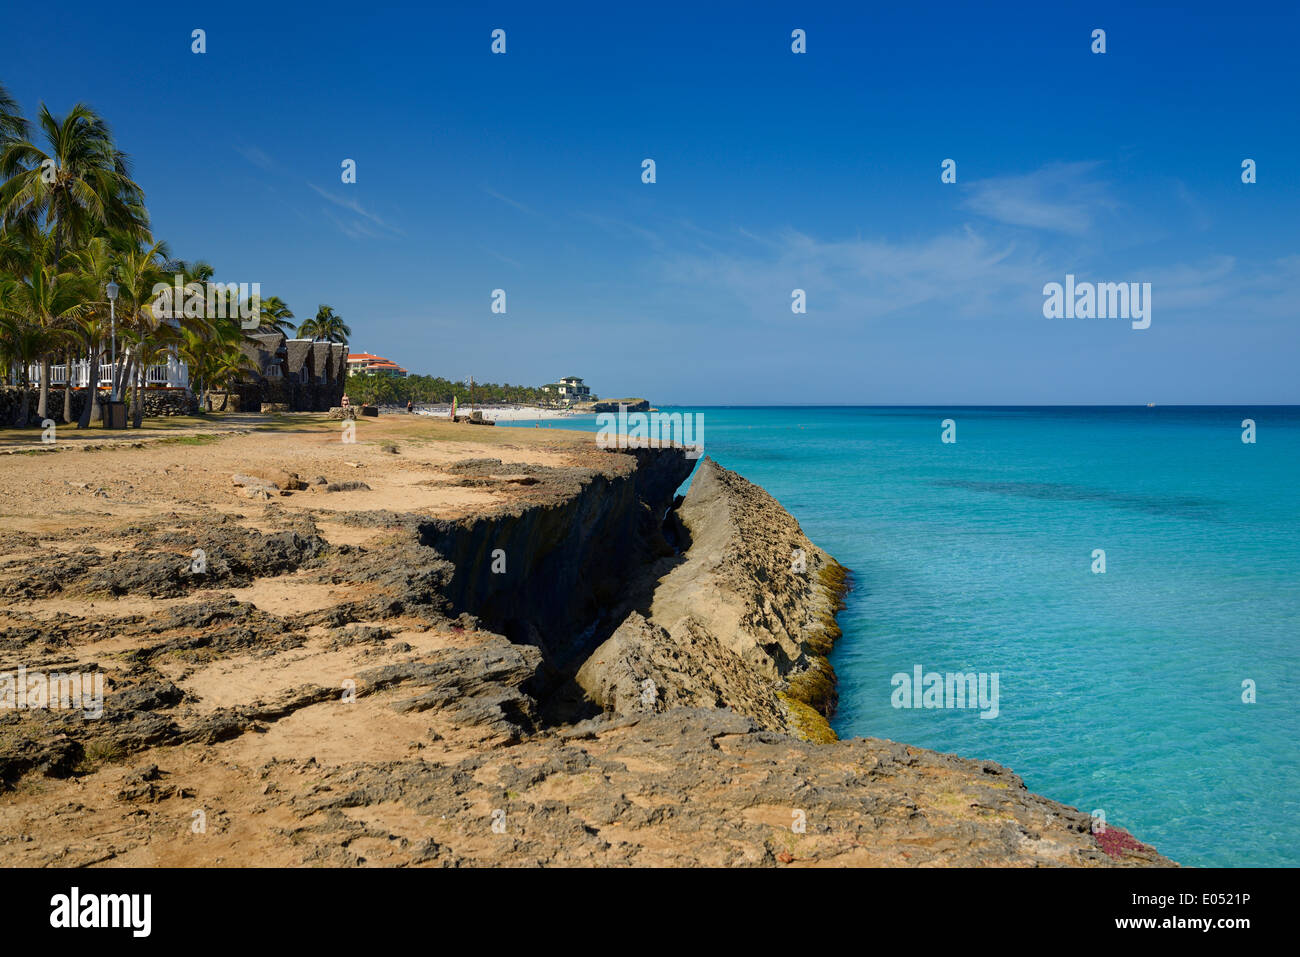 Lava rock shore at Varadero Cuba resort with turquoise ocean  and white sand beach Stock Photo